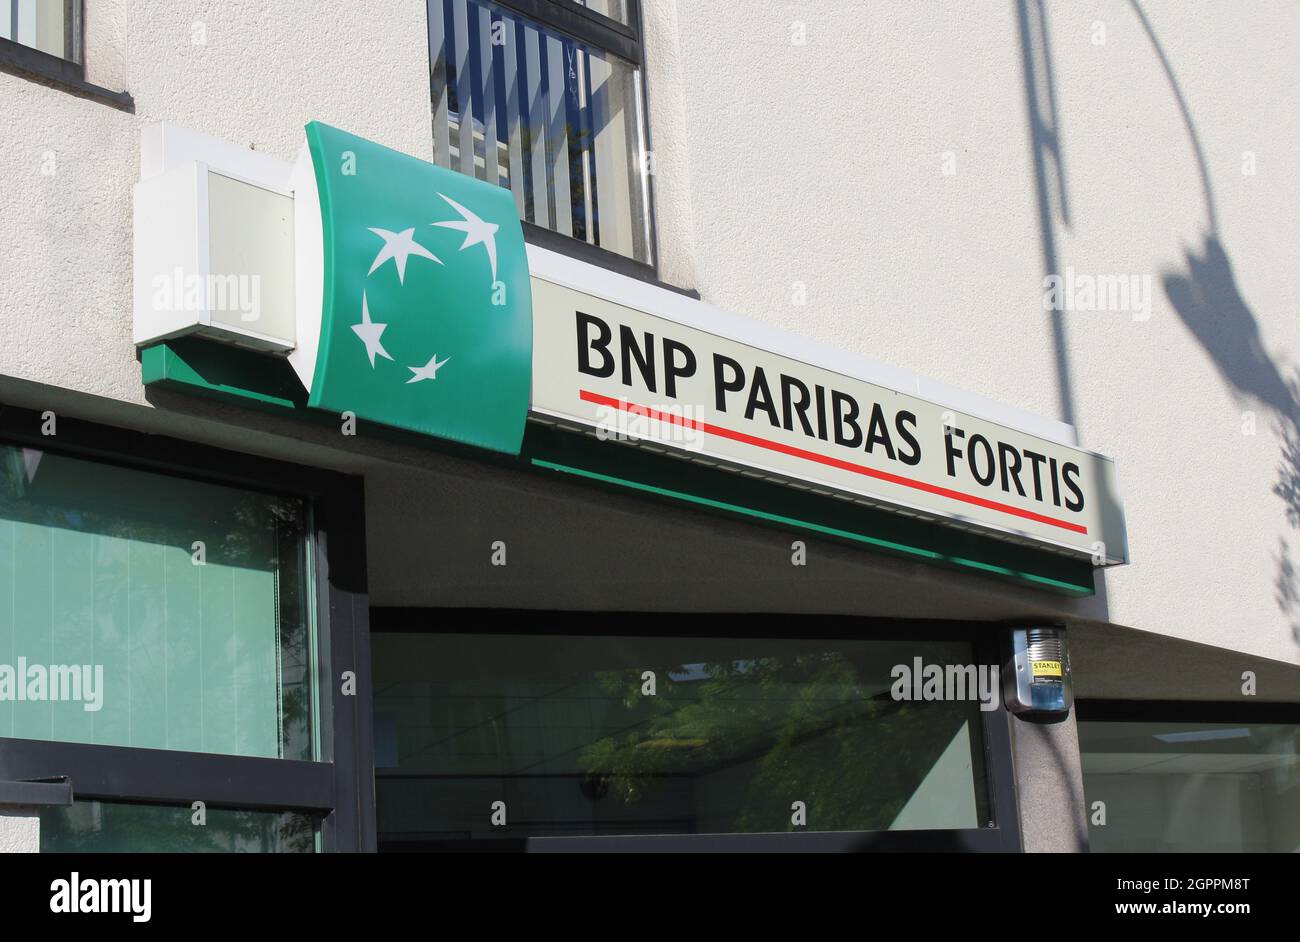 LEBBEKE, BELGIUM, 25 AUGUST 2021: Exterior view of a branch of BNP Paribas Fortis High street Banks. It is currently the largest bank in Belgium. Stock Photo